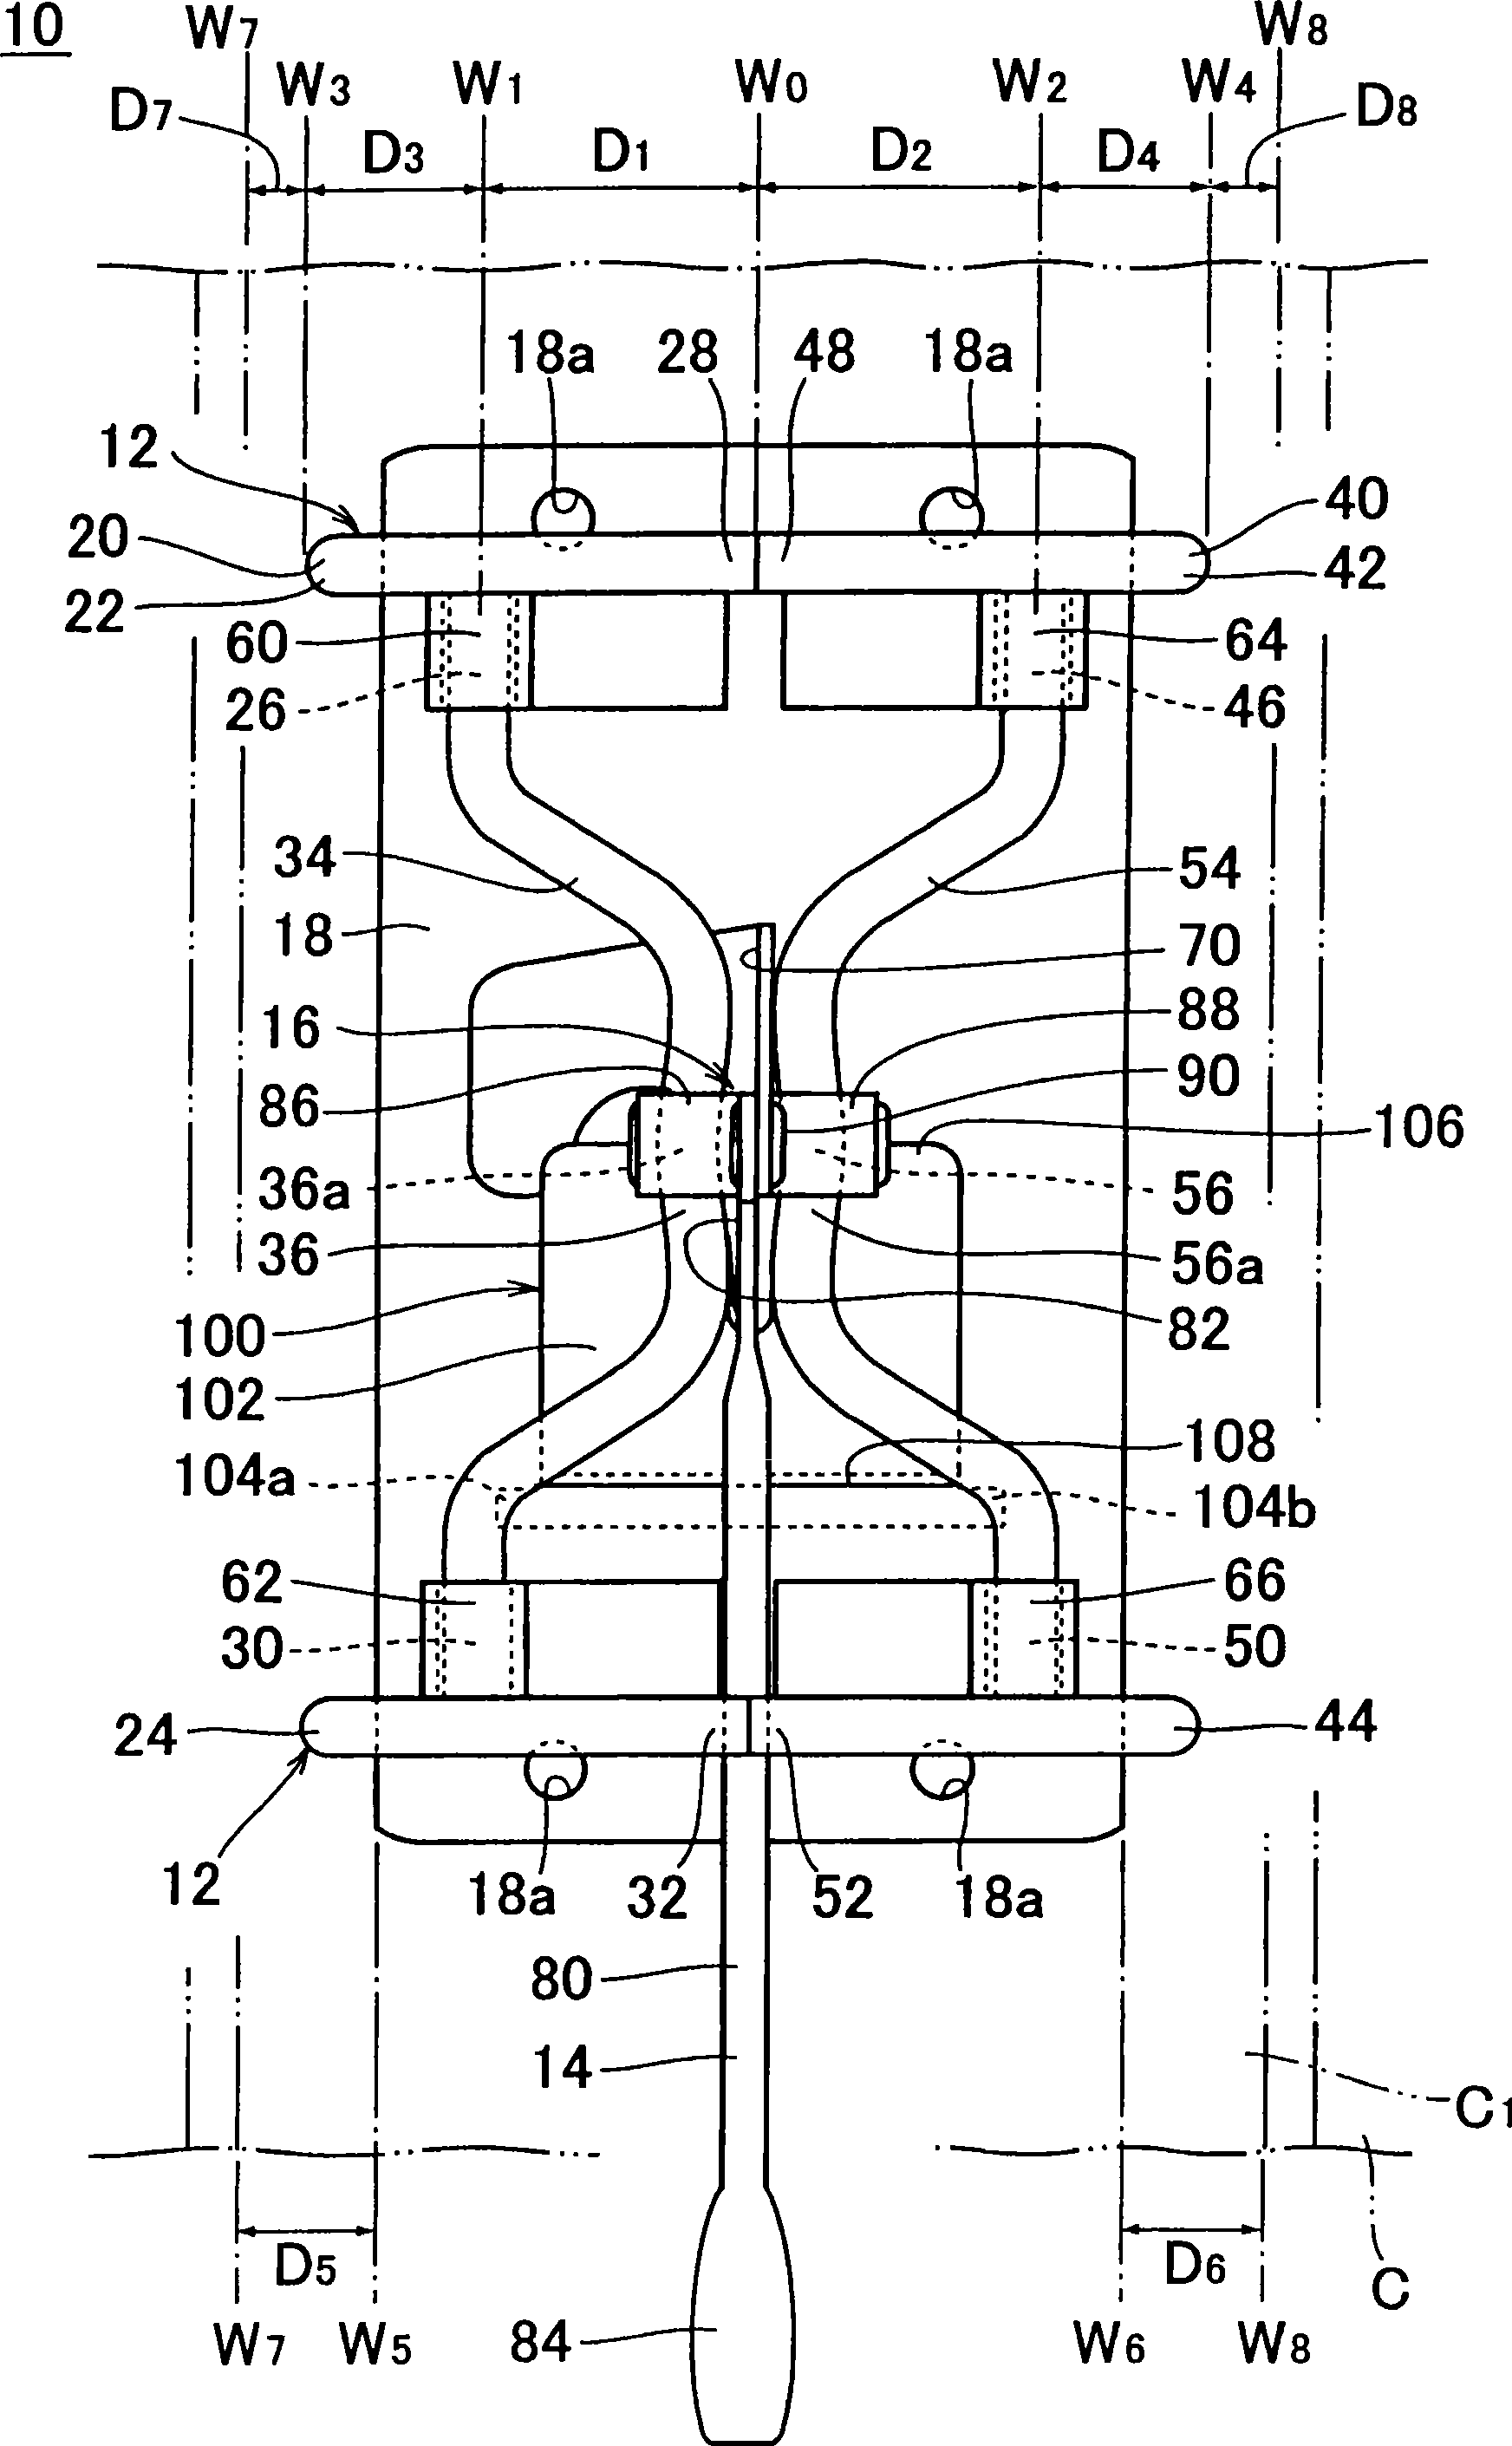 Binding device for files and binders